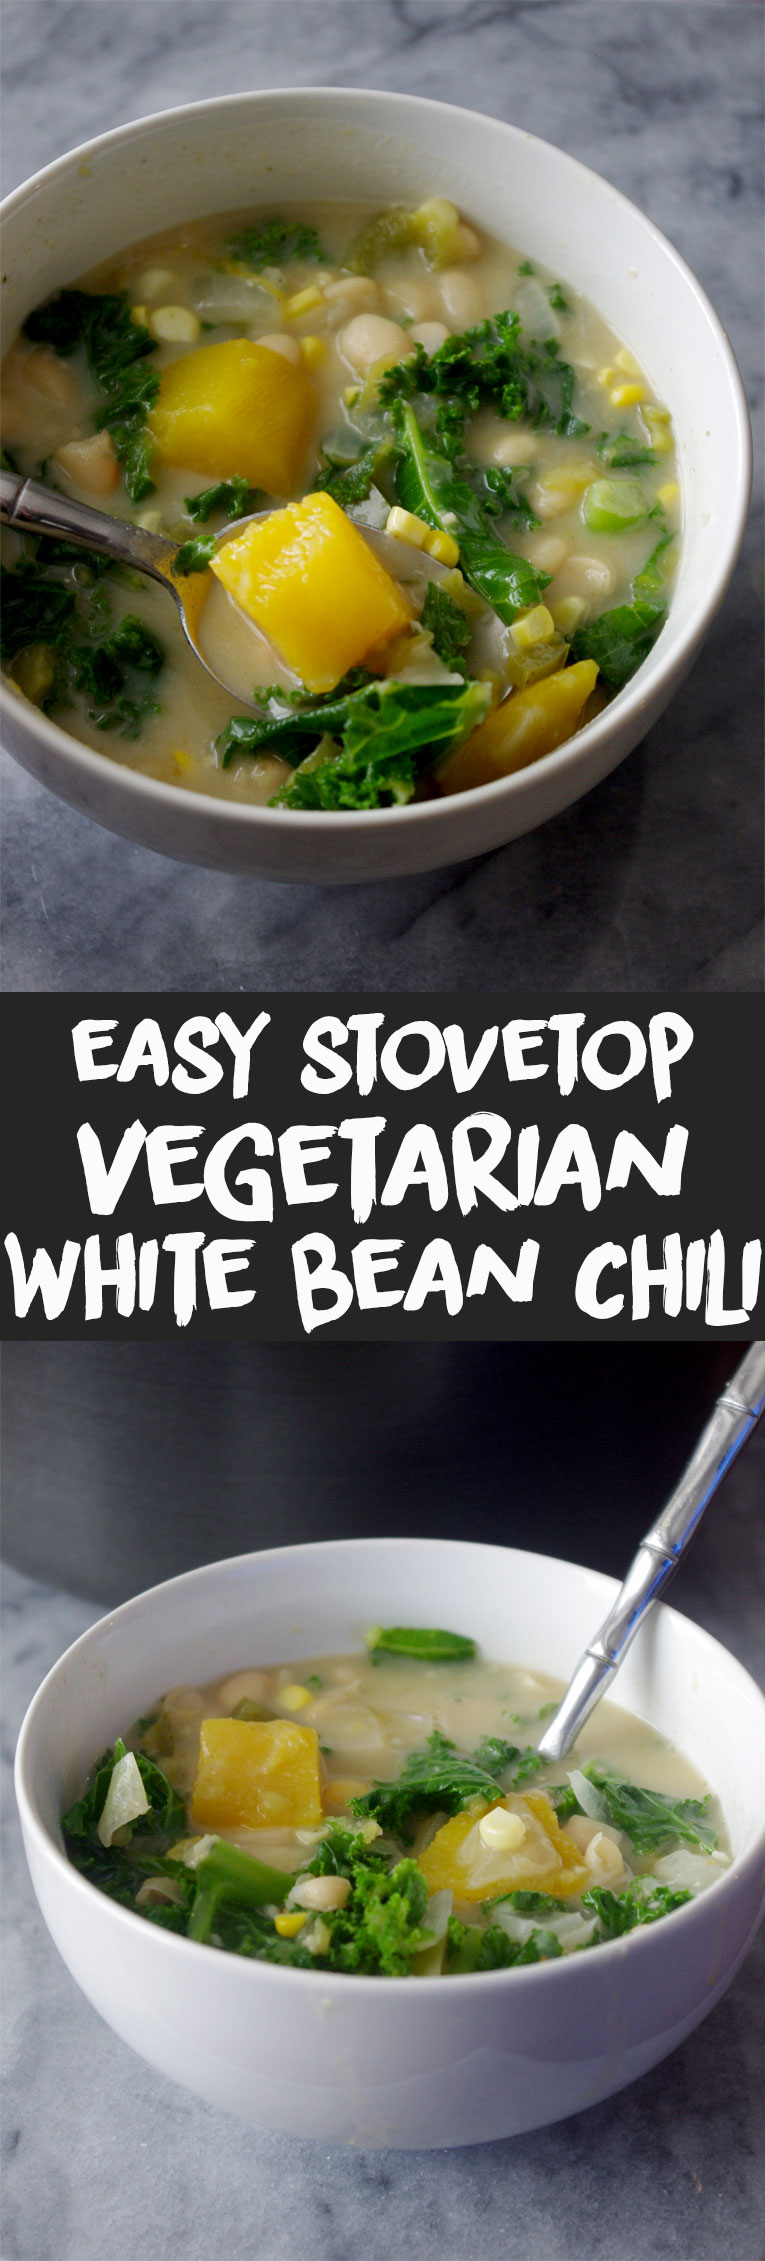 Easy Stovetop Vegetarian White Bean Chili is a quick dinner for those busy autumn weeknights or cozy weekend afternoons | www.thebatterthickens.com